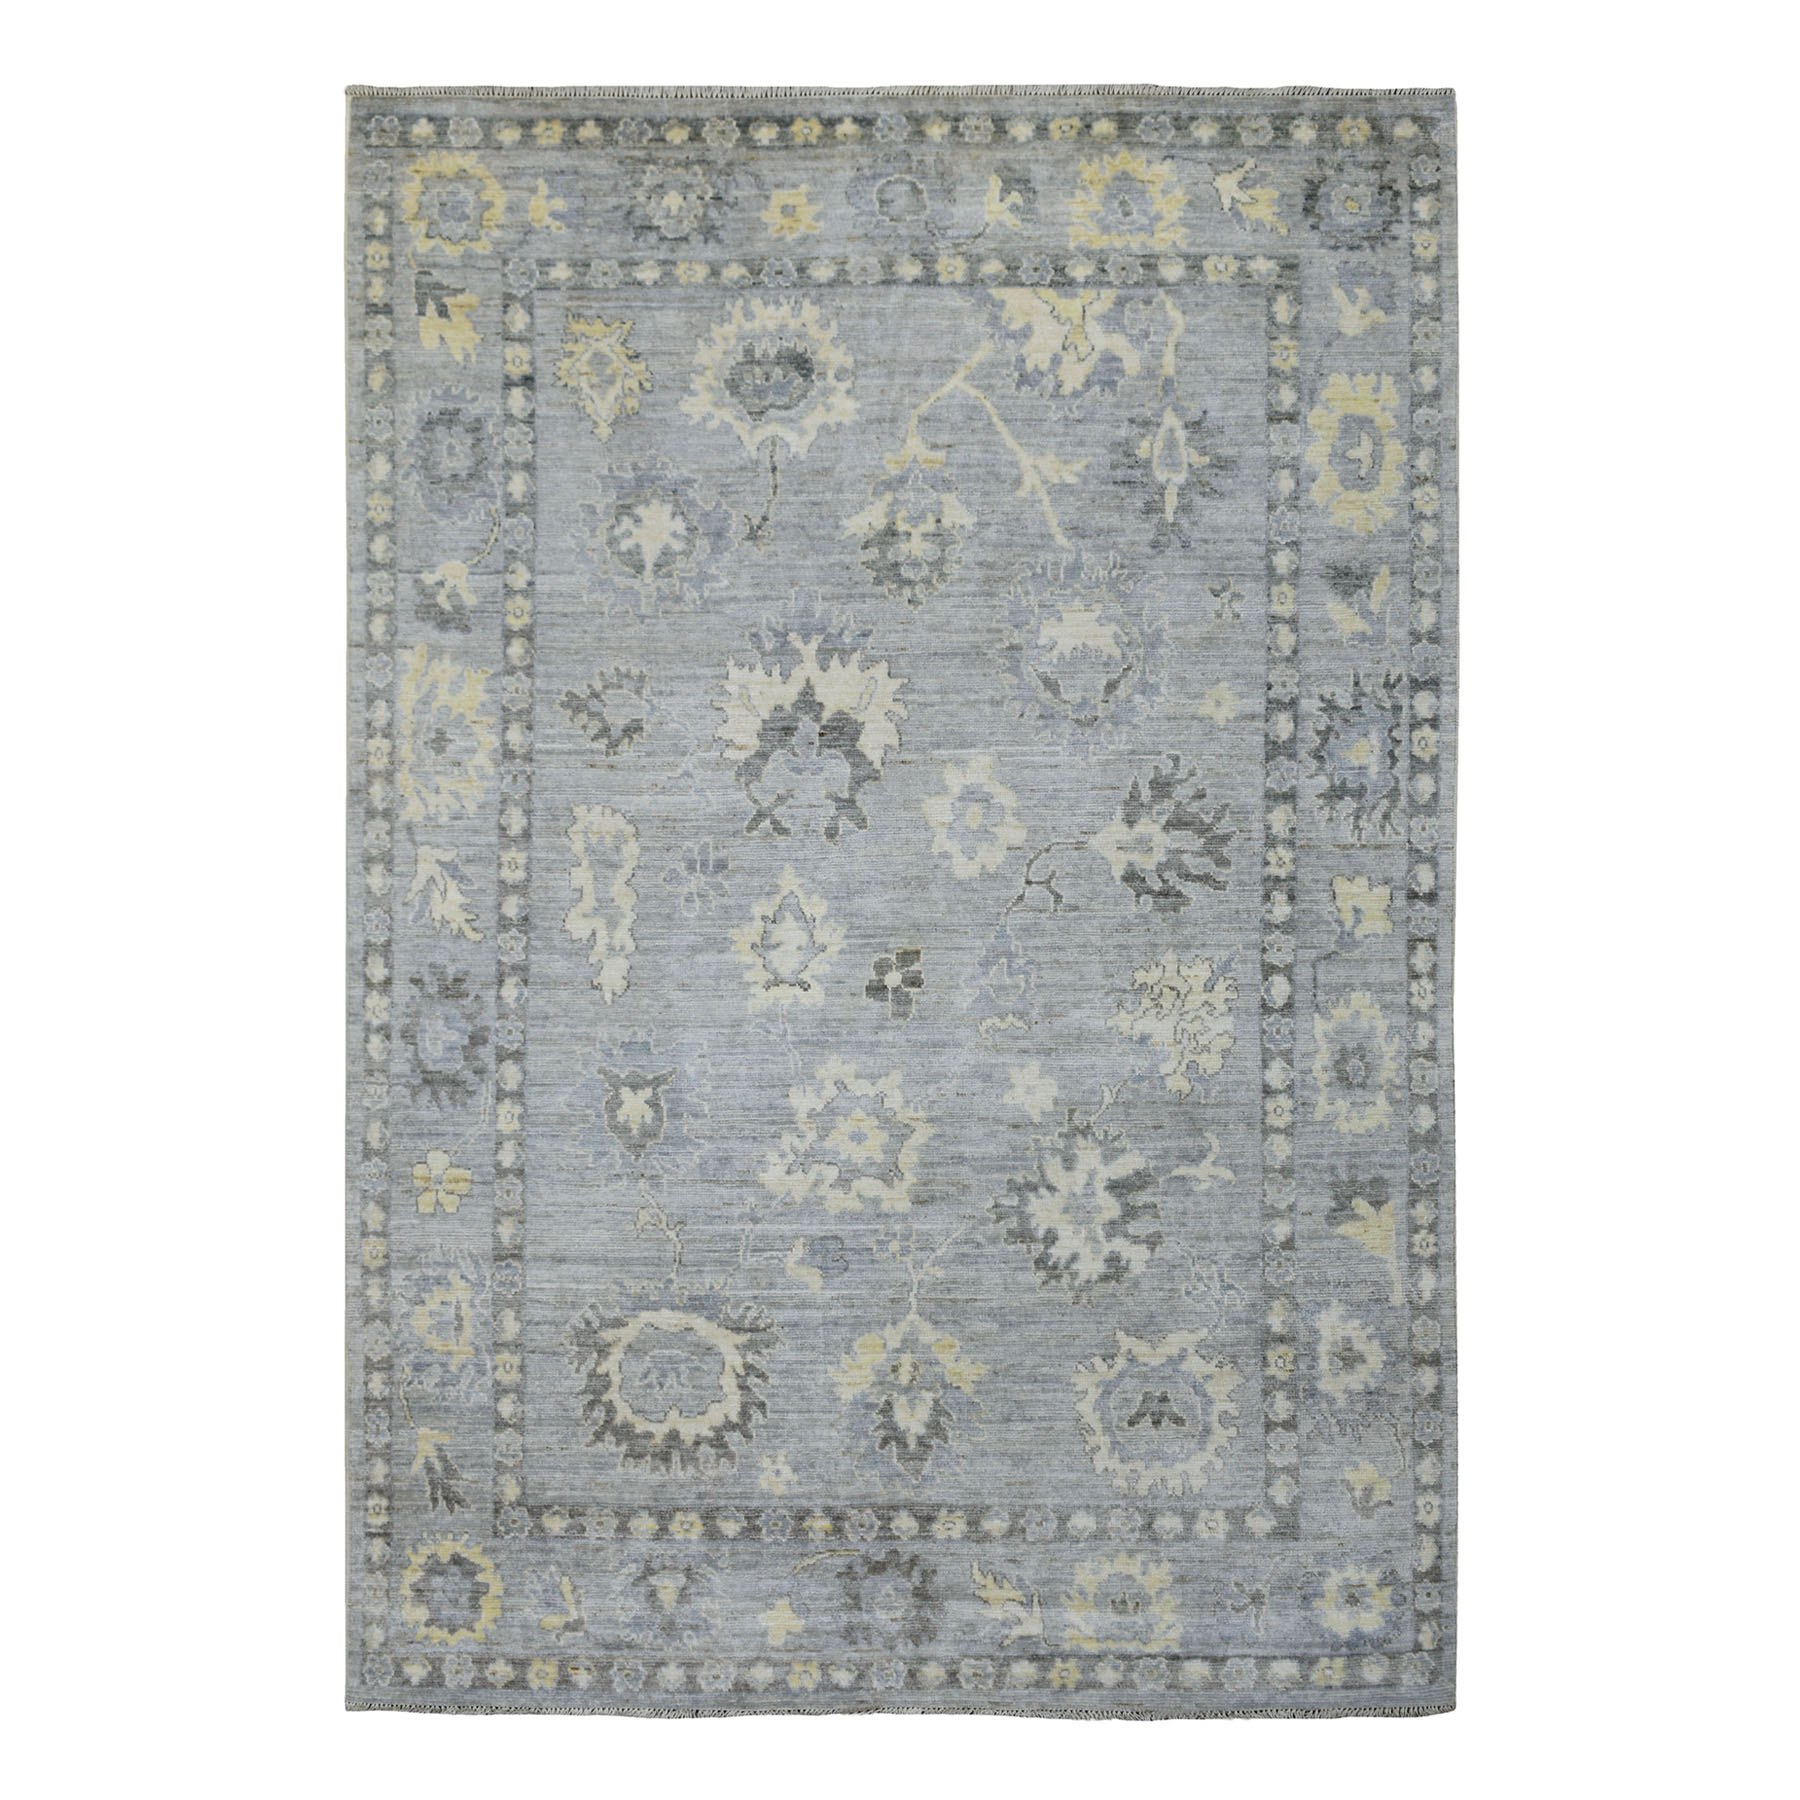 6'1"x8'10" Hand Woven Gray with Touches of Ivory Angora Oushak Pure Wool Oriental Rug 